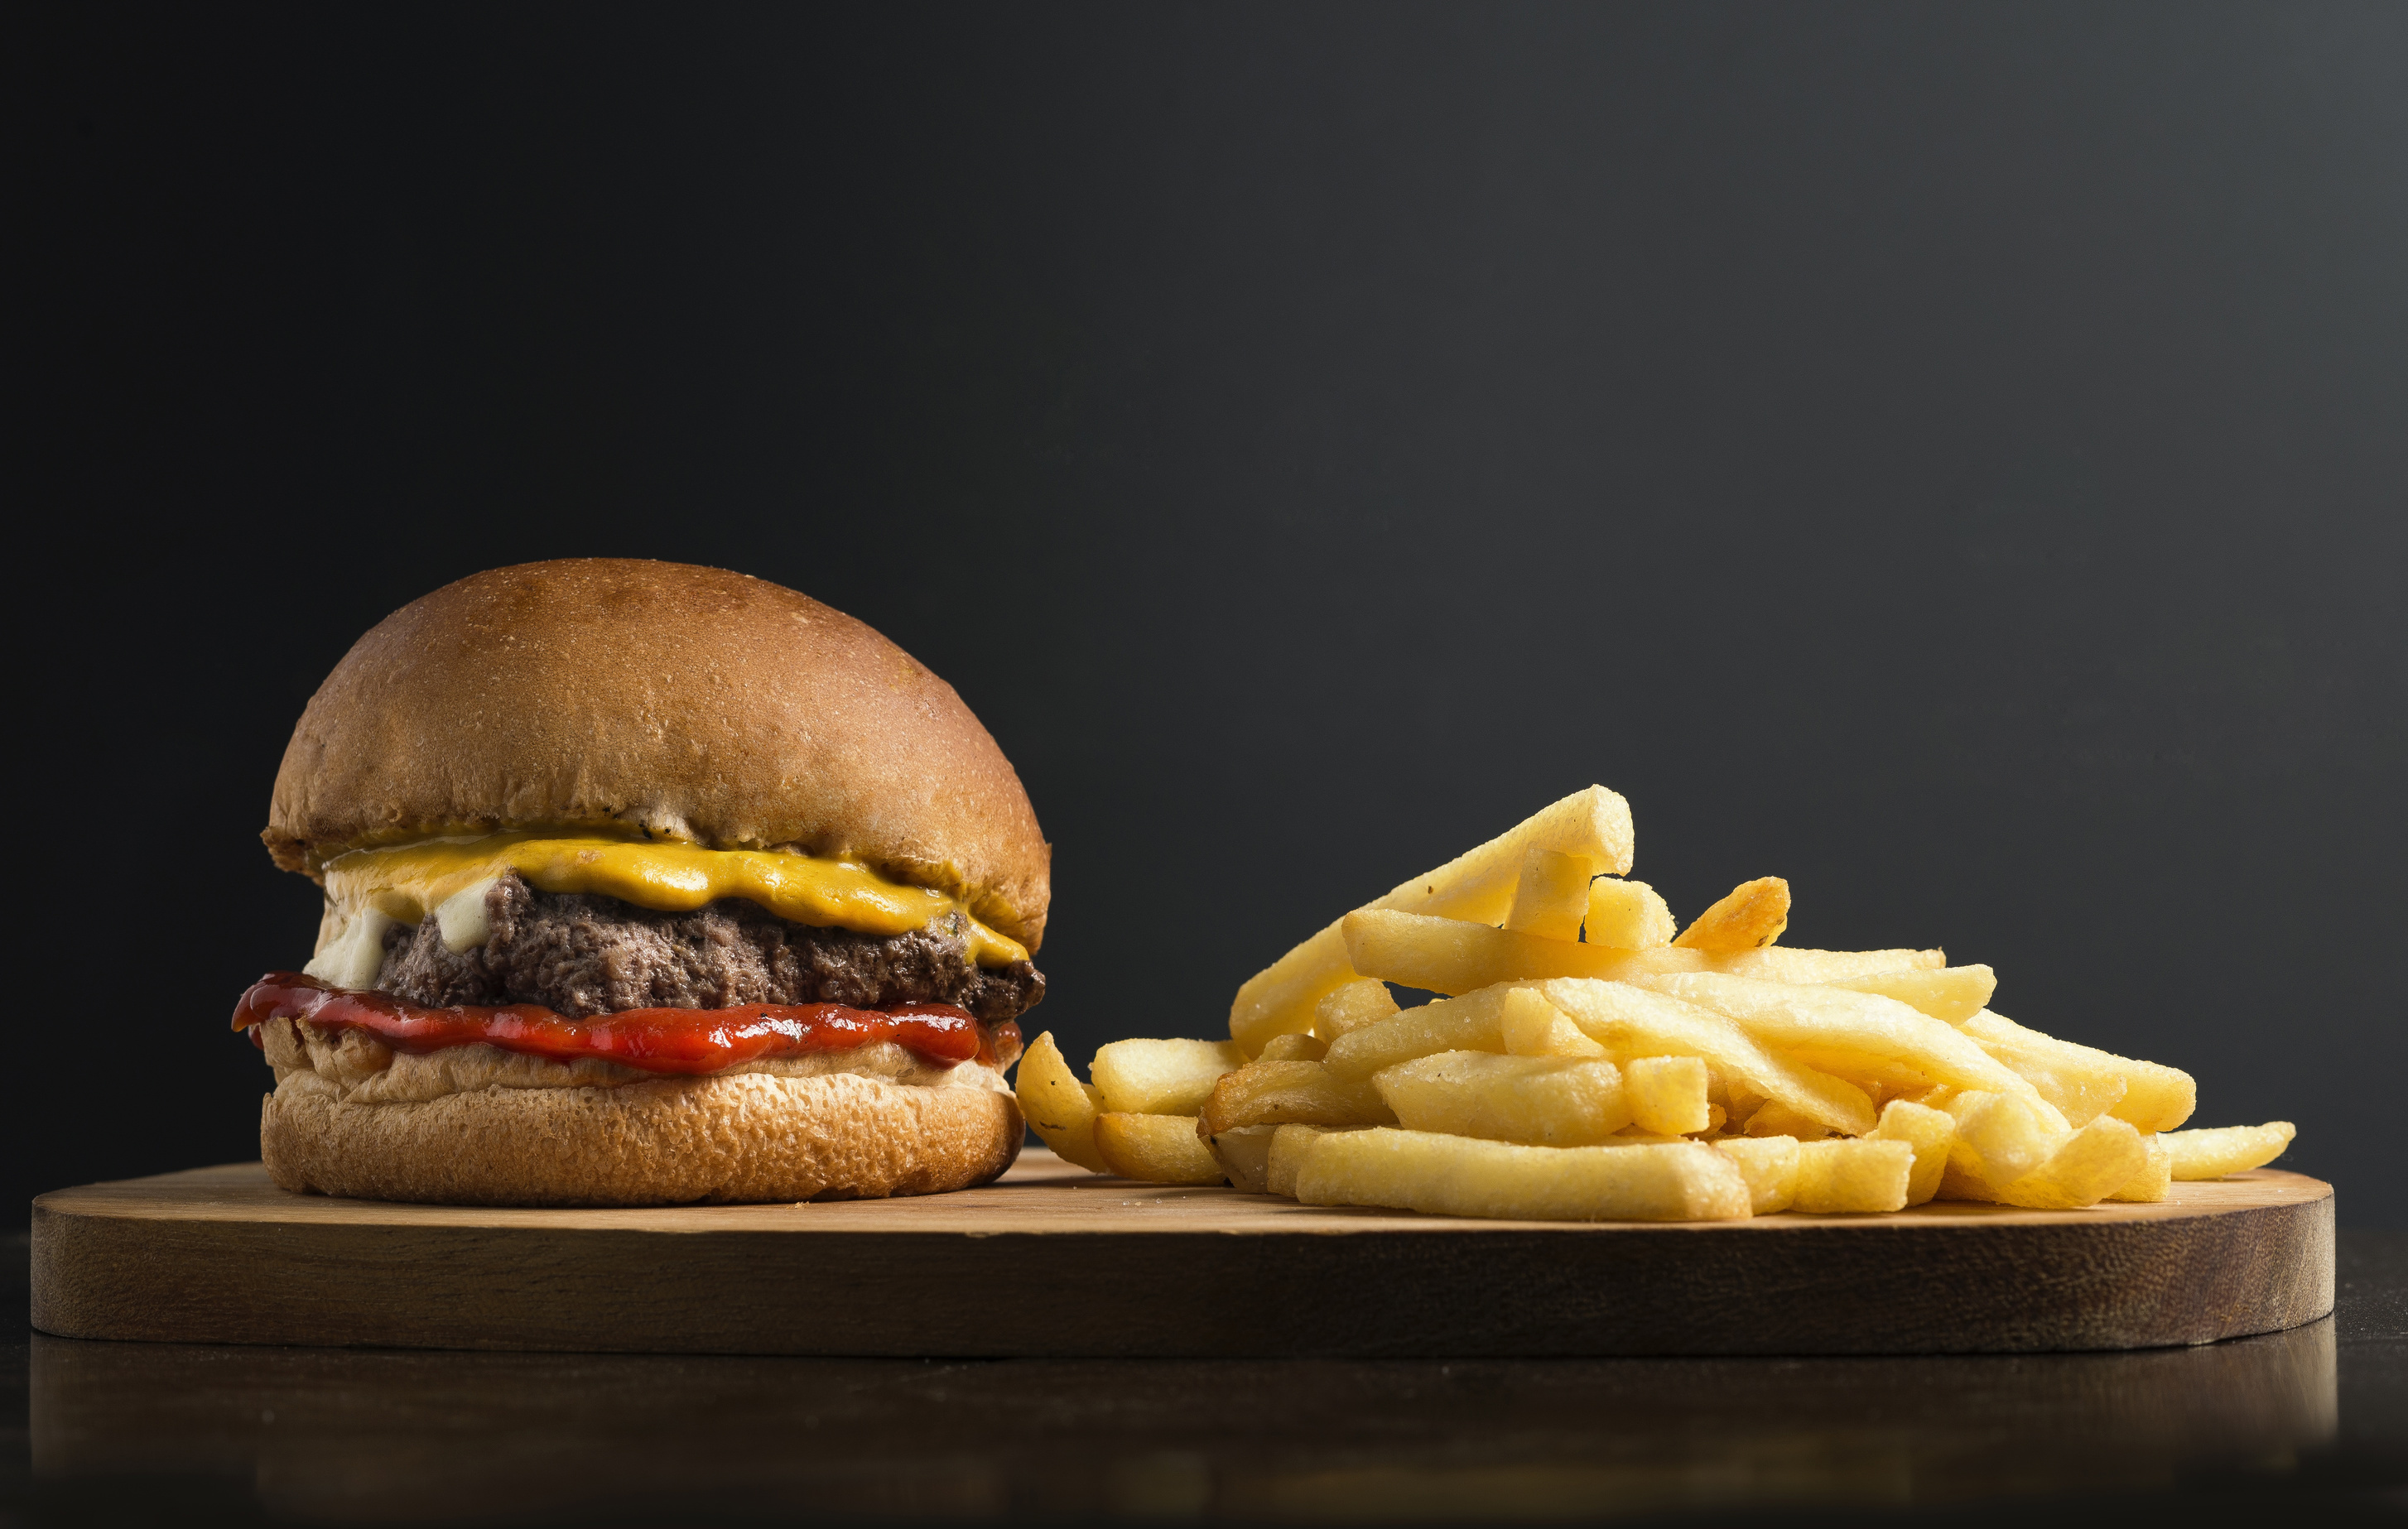 Cheeseburguer and French Fries on Black Background